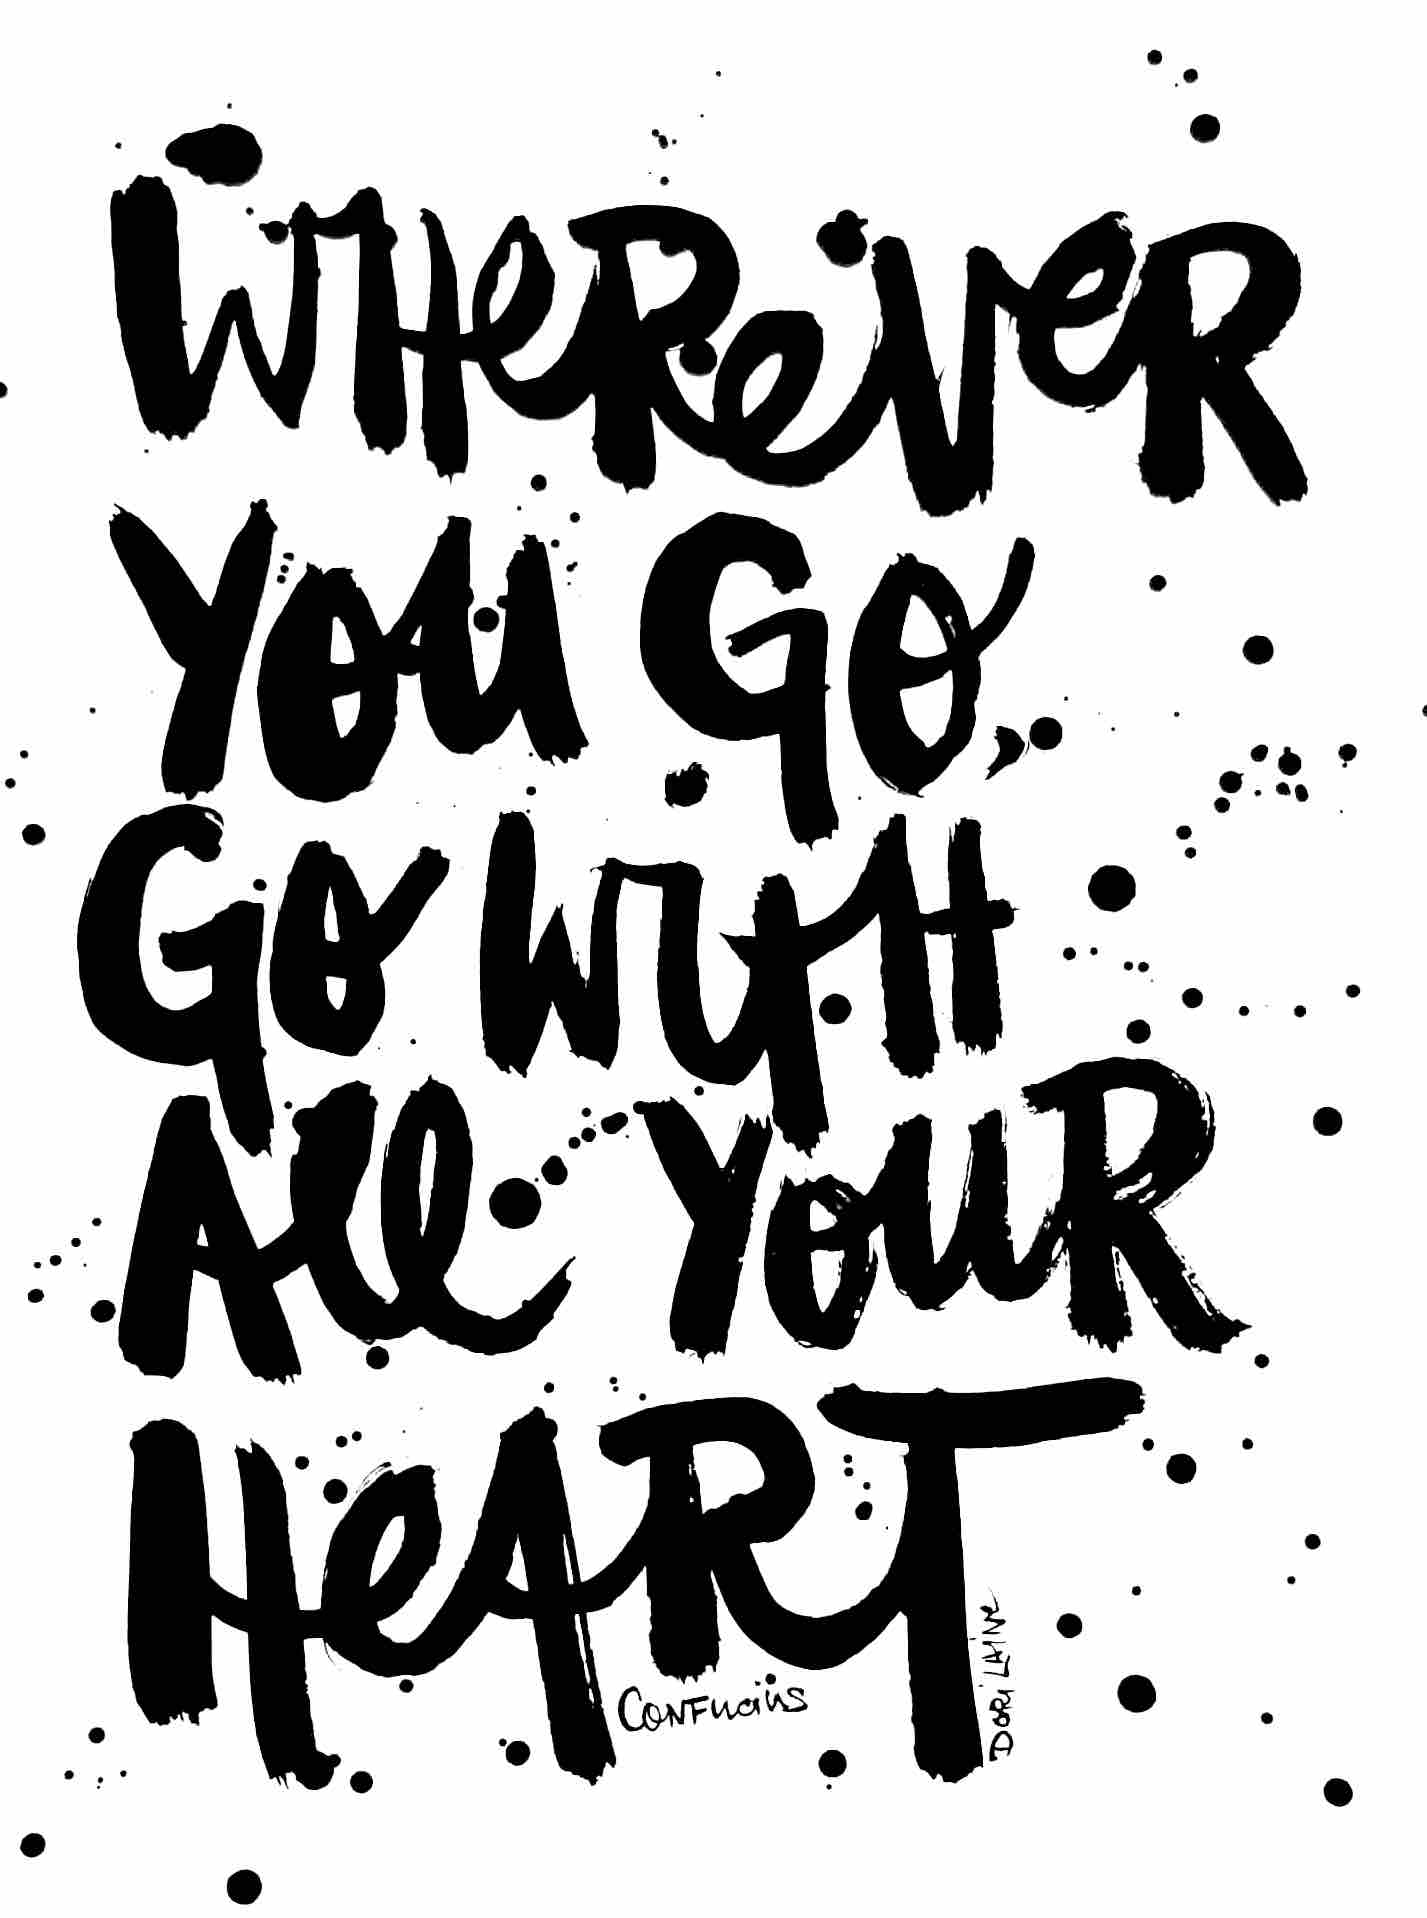 Go with all your heart.jpg